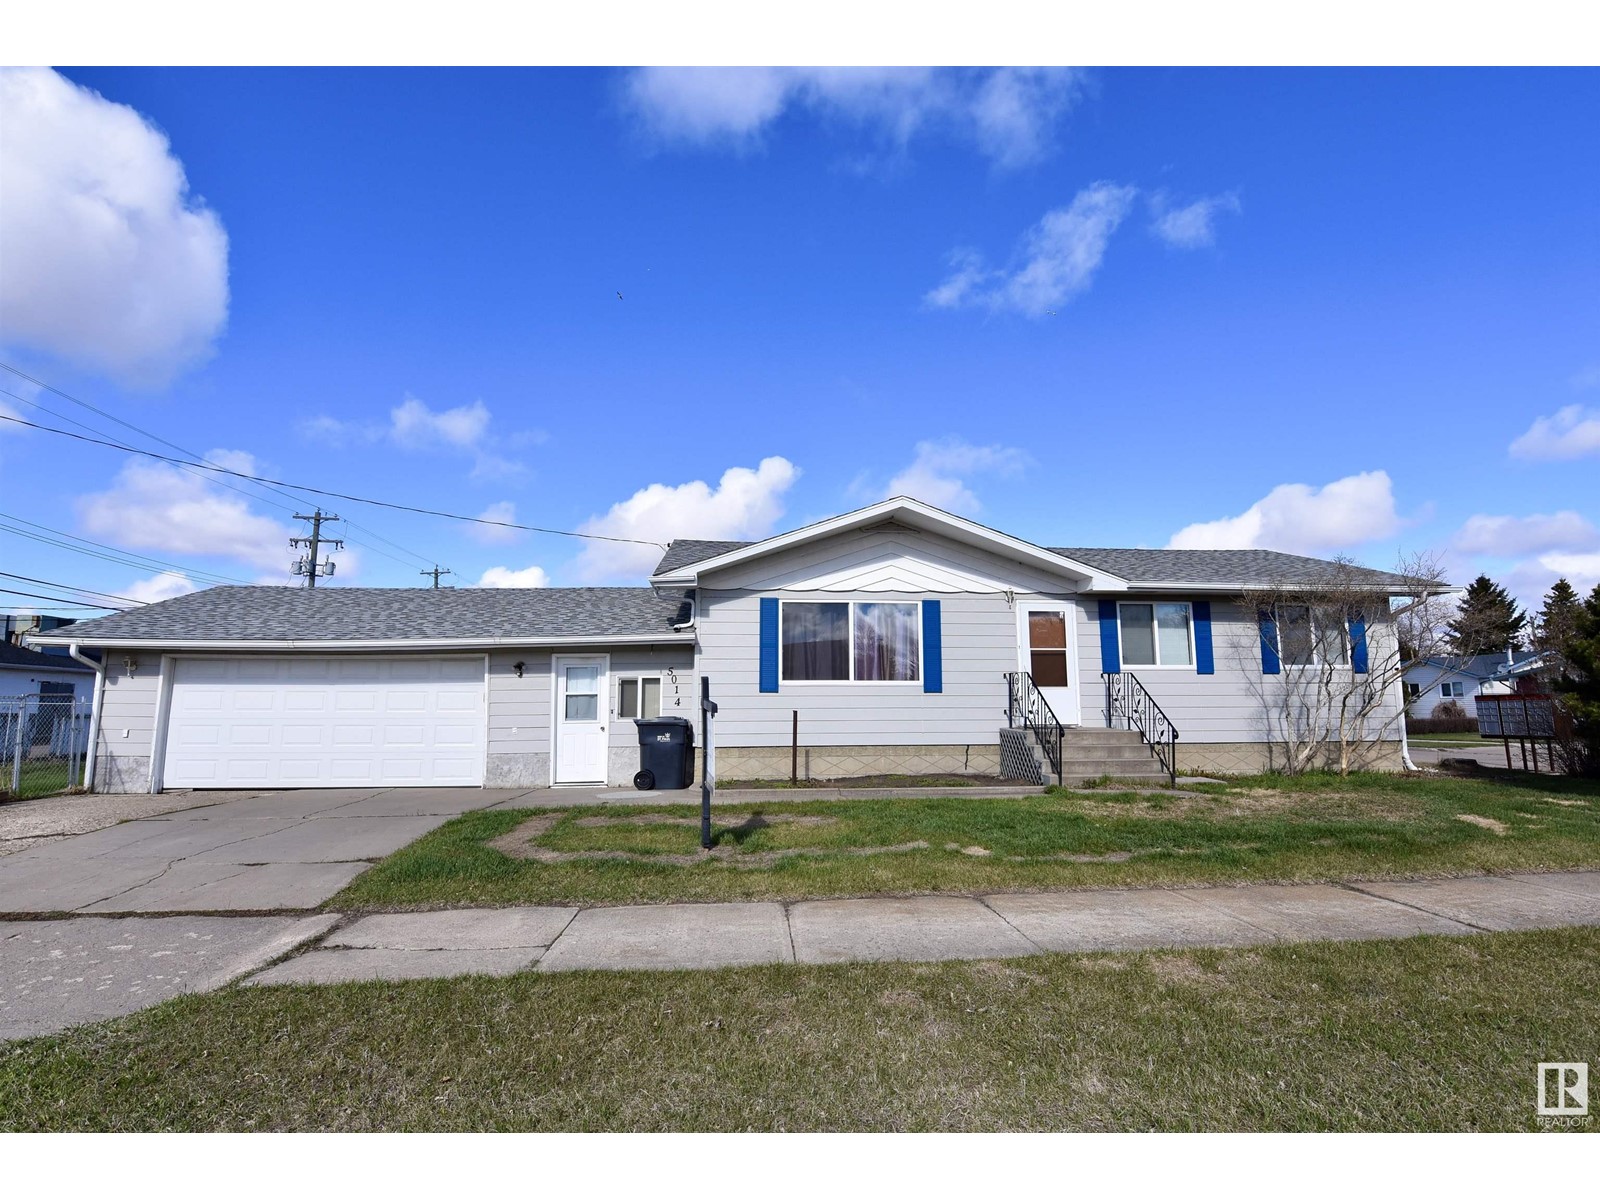 5014 45 ST located in St. Paul Town, Alberta